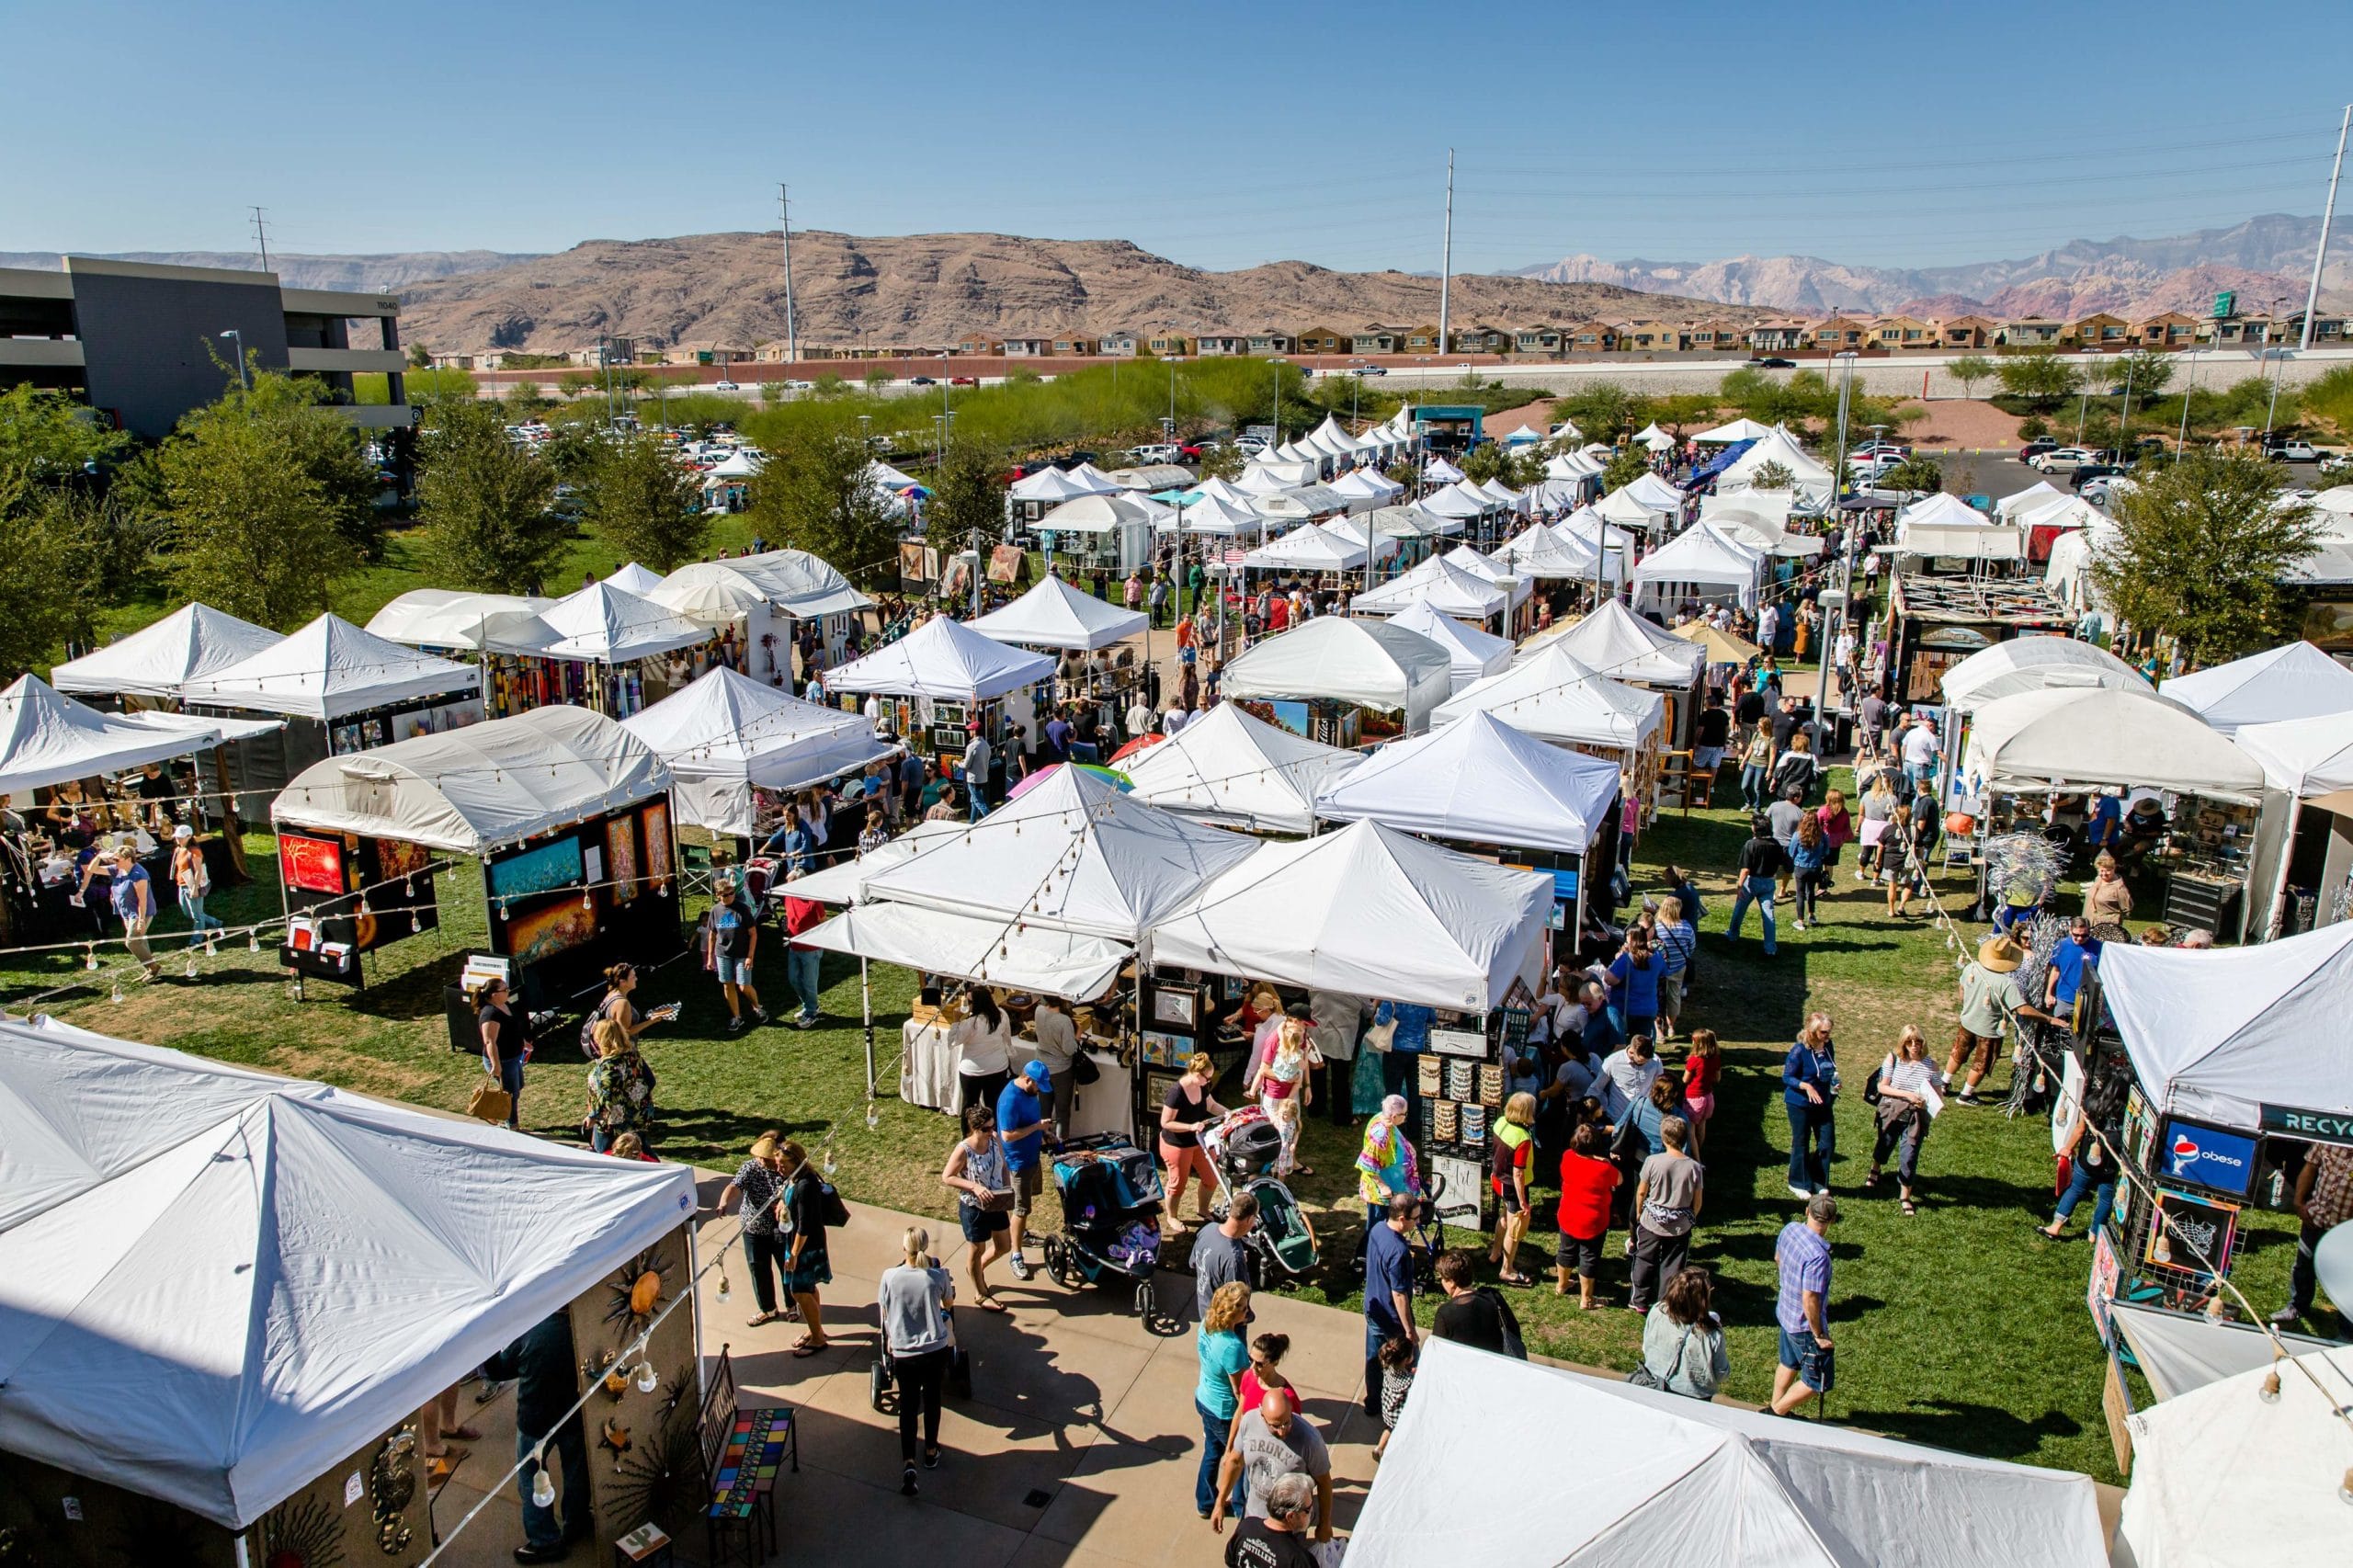 Fall’s Arrival Signaled by Popular Annual Events in Summerlin Summerlin